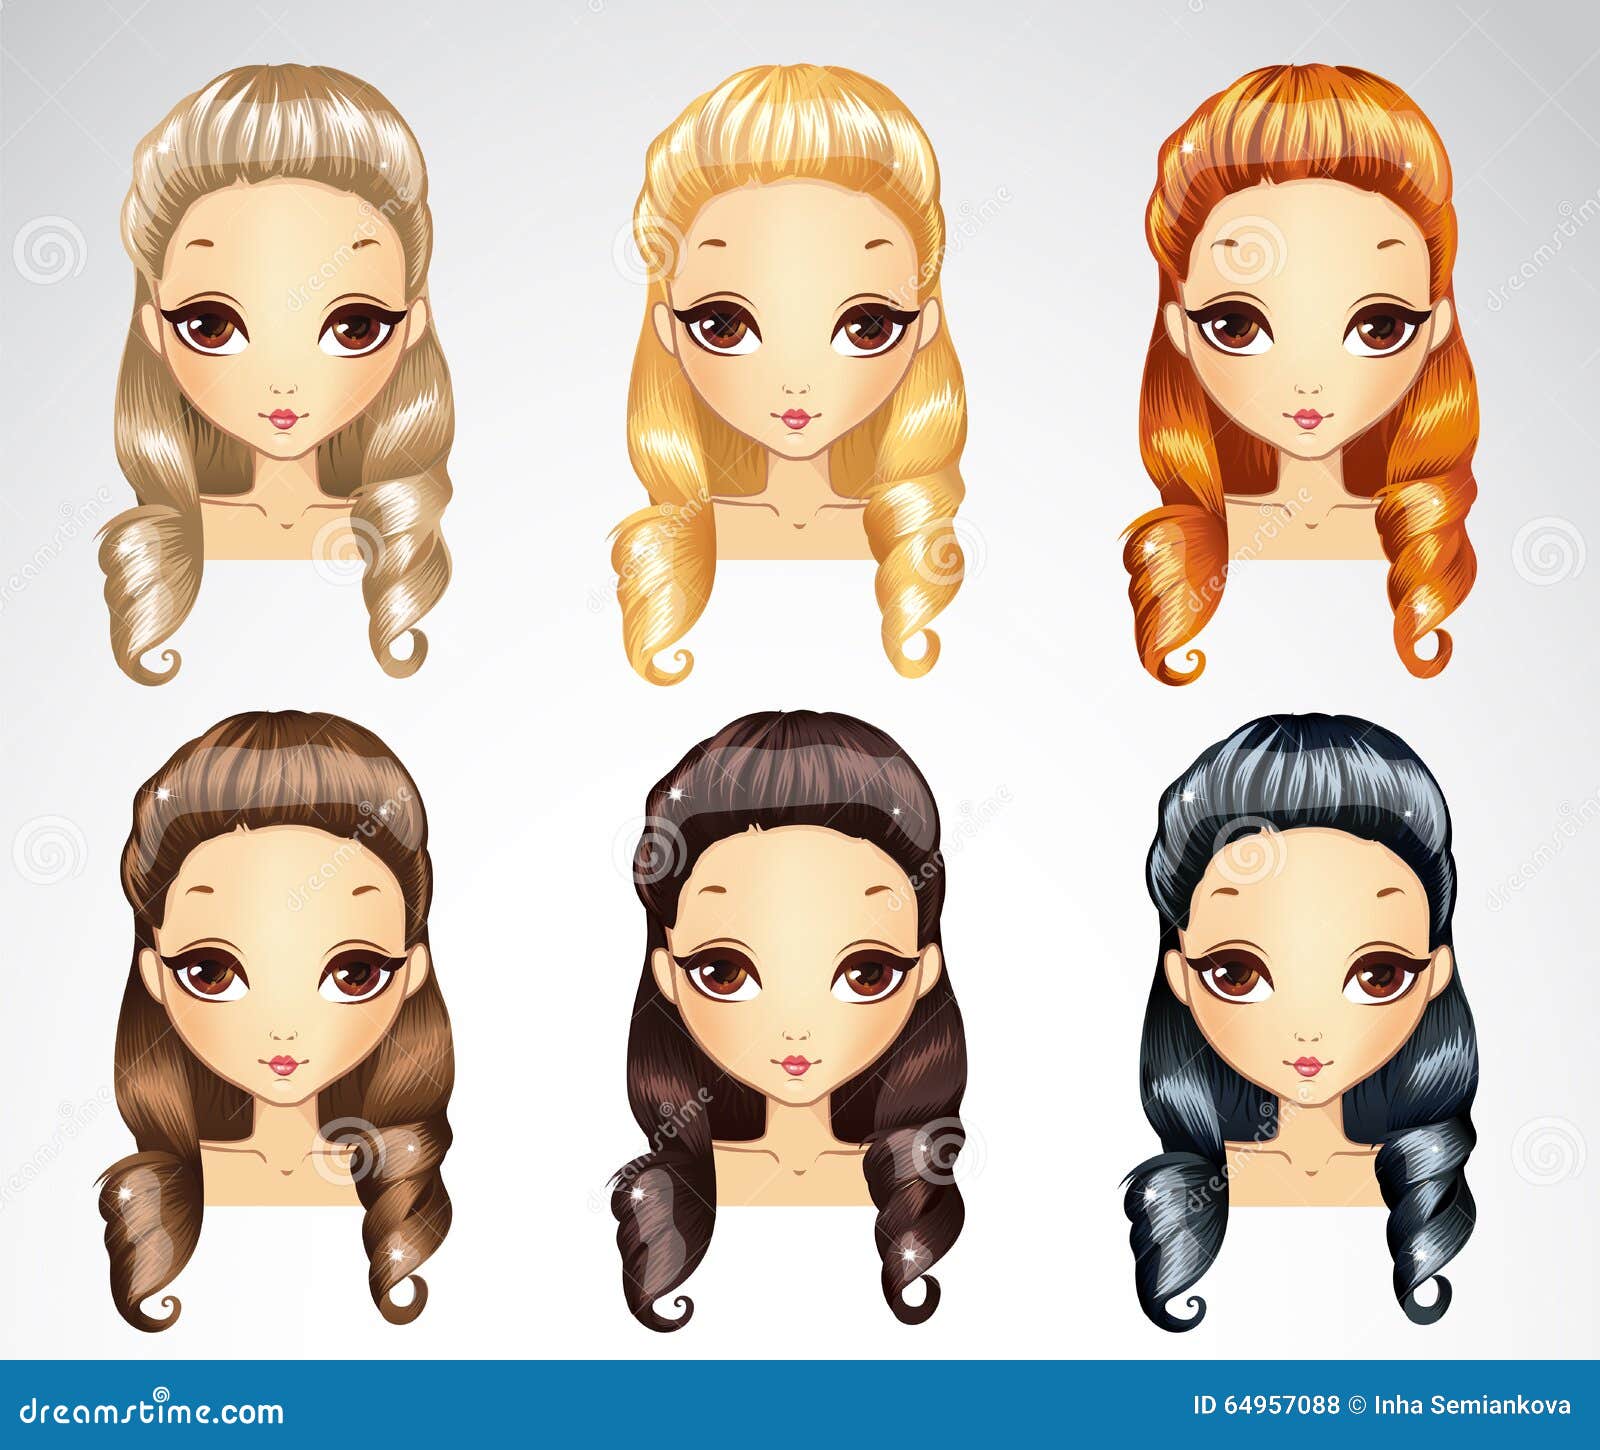 Fashion Princess Curls Hairstyle Set Stock Vector - Illustration of curly,  fashion: 64957088